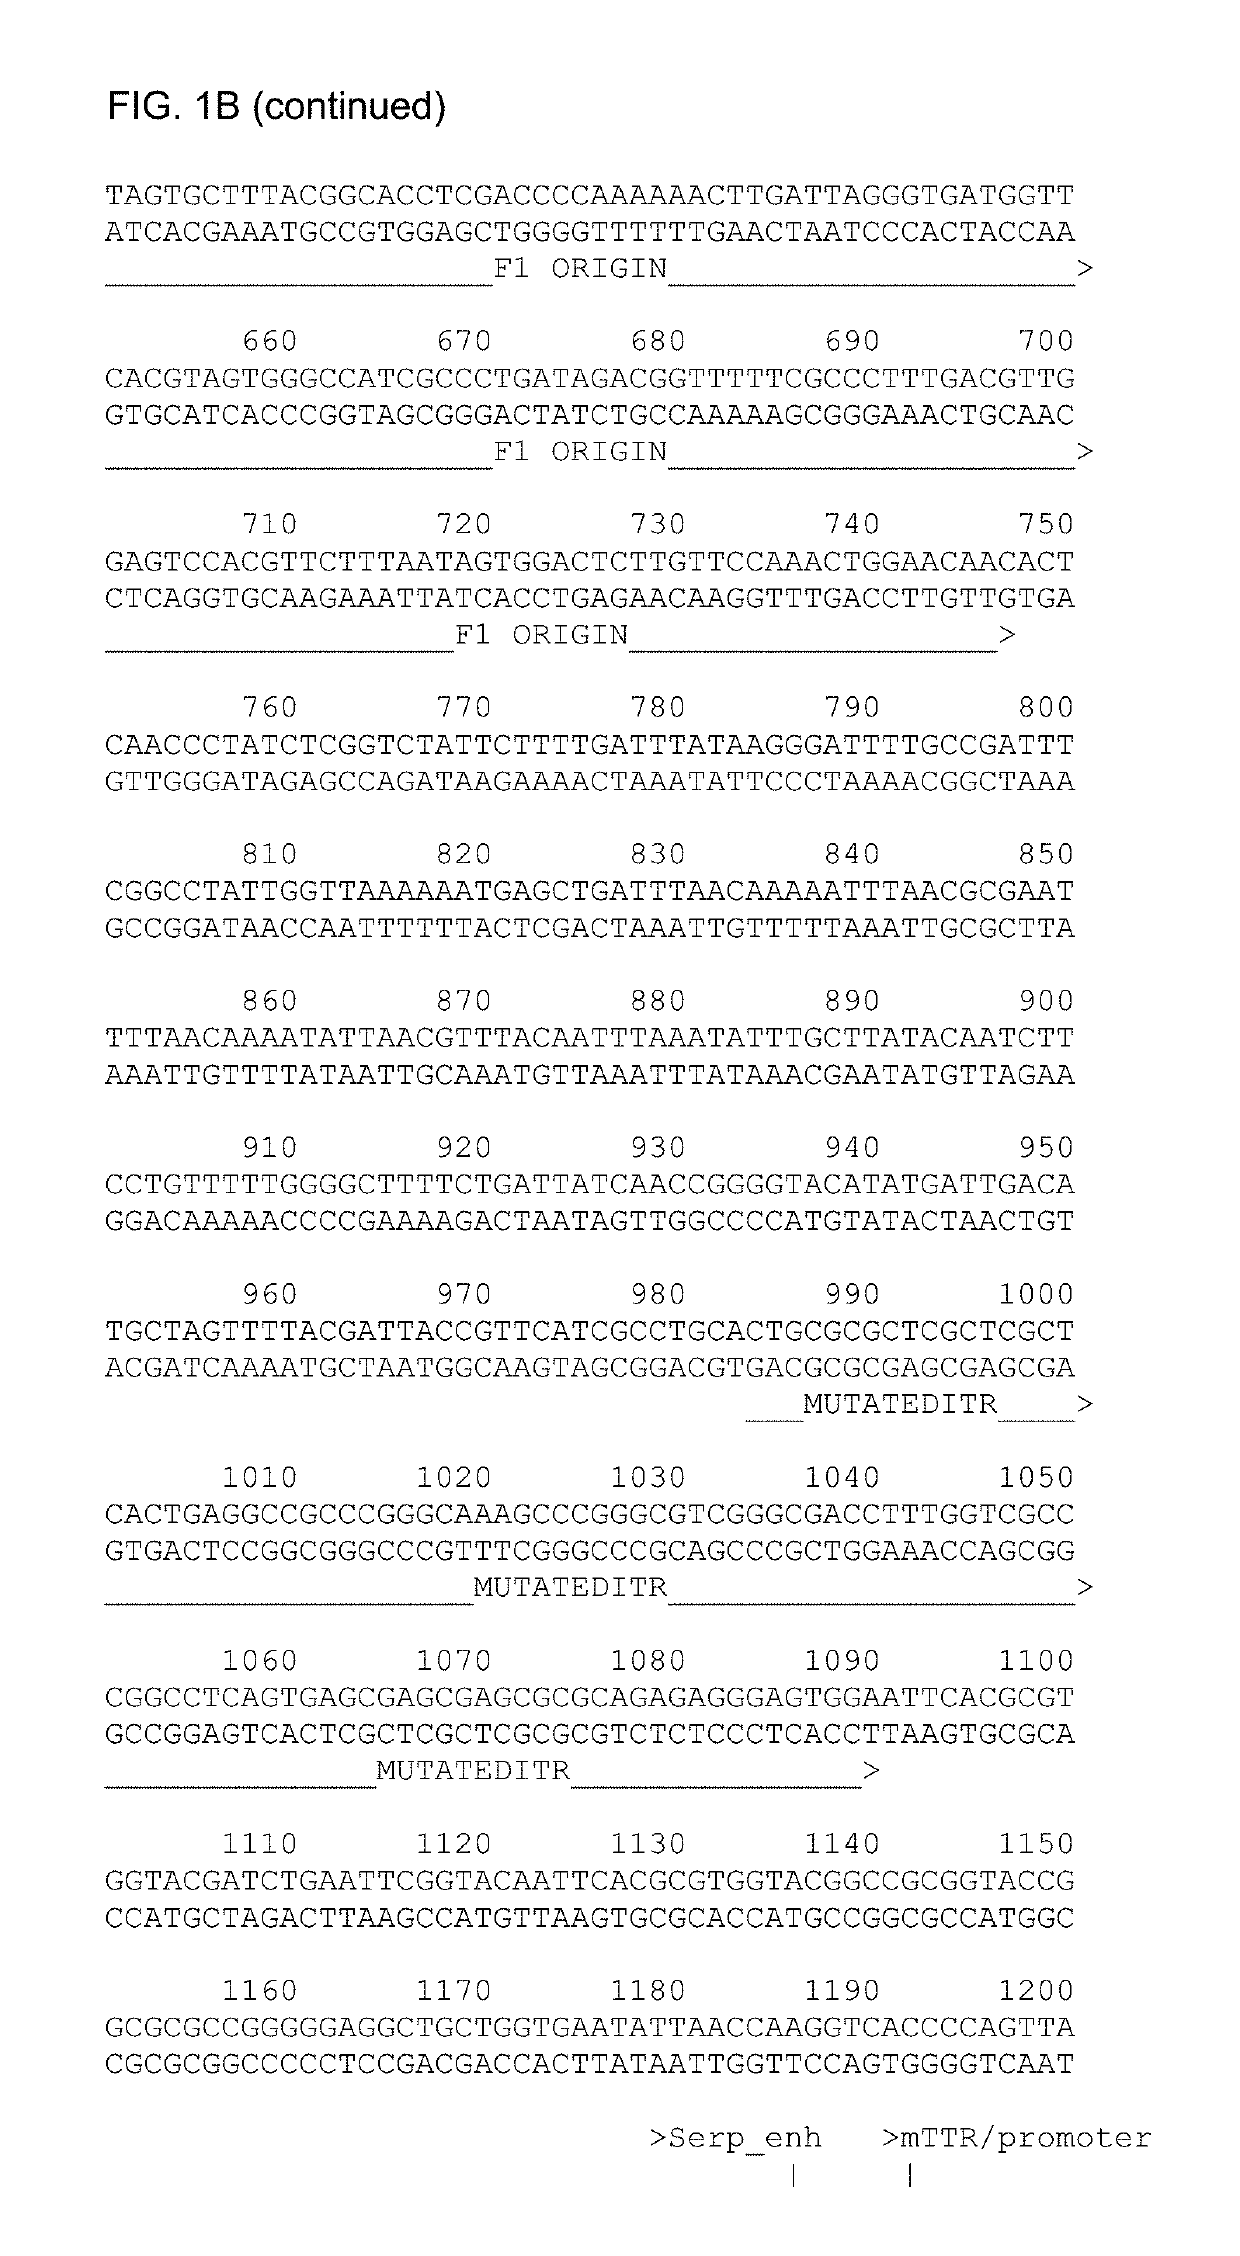 Vectors for liver-directed gene therapy of hemophilia and methods and use thereof